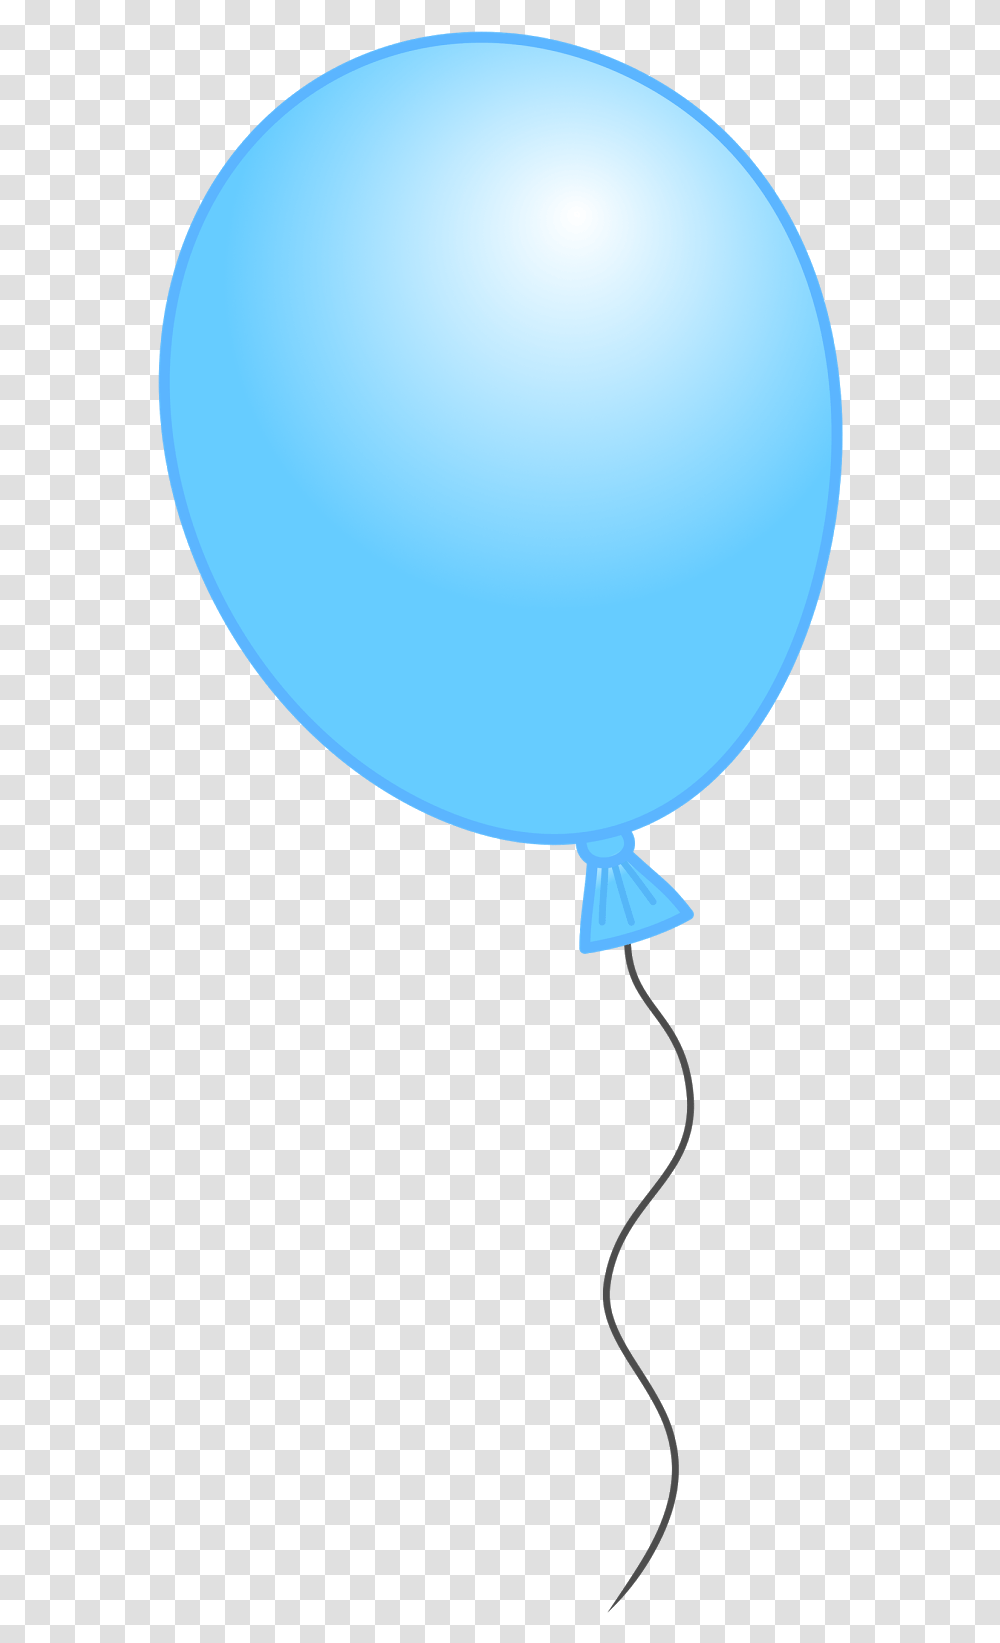 Blue Balloon 28091 Free Icons And Backgrounds Balloon, Lamp Transparent Png